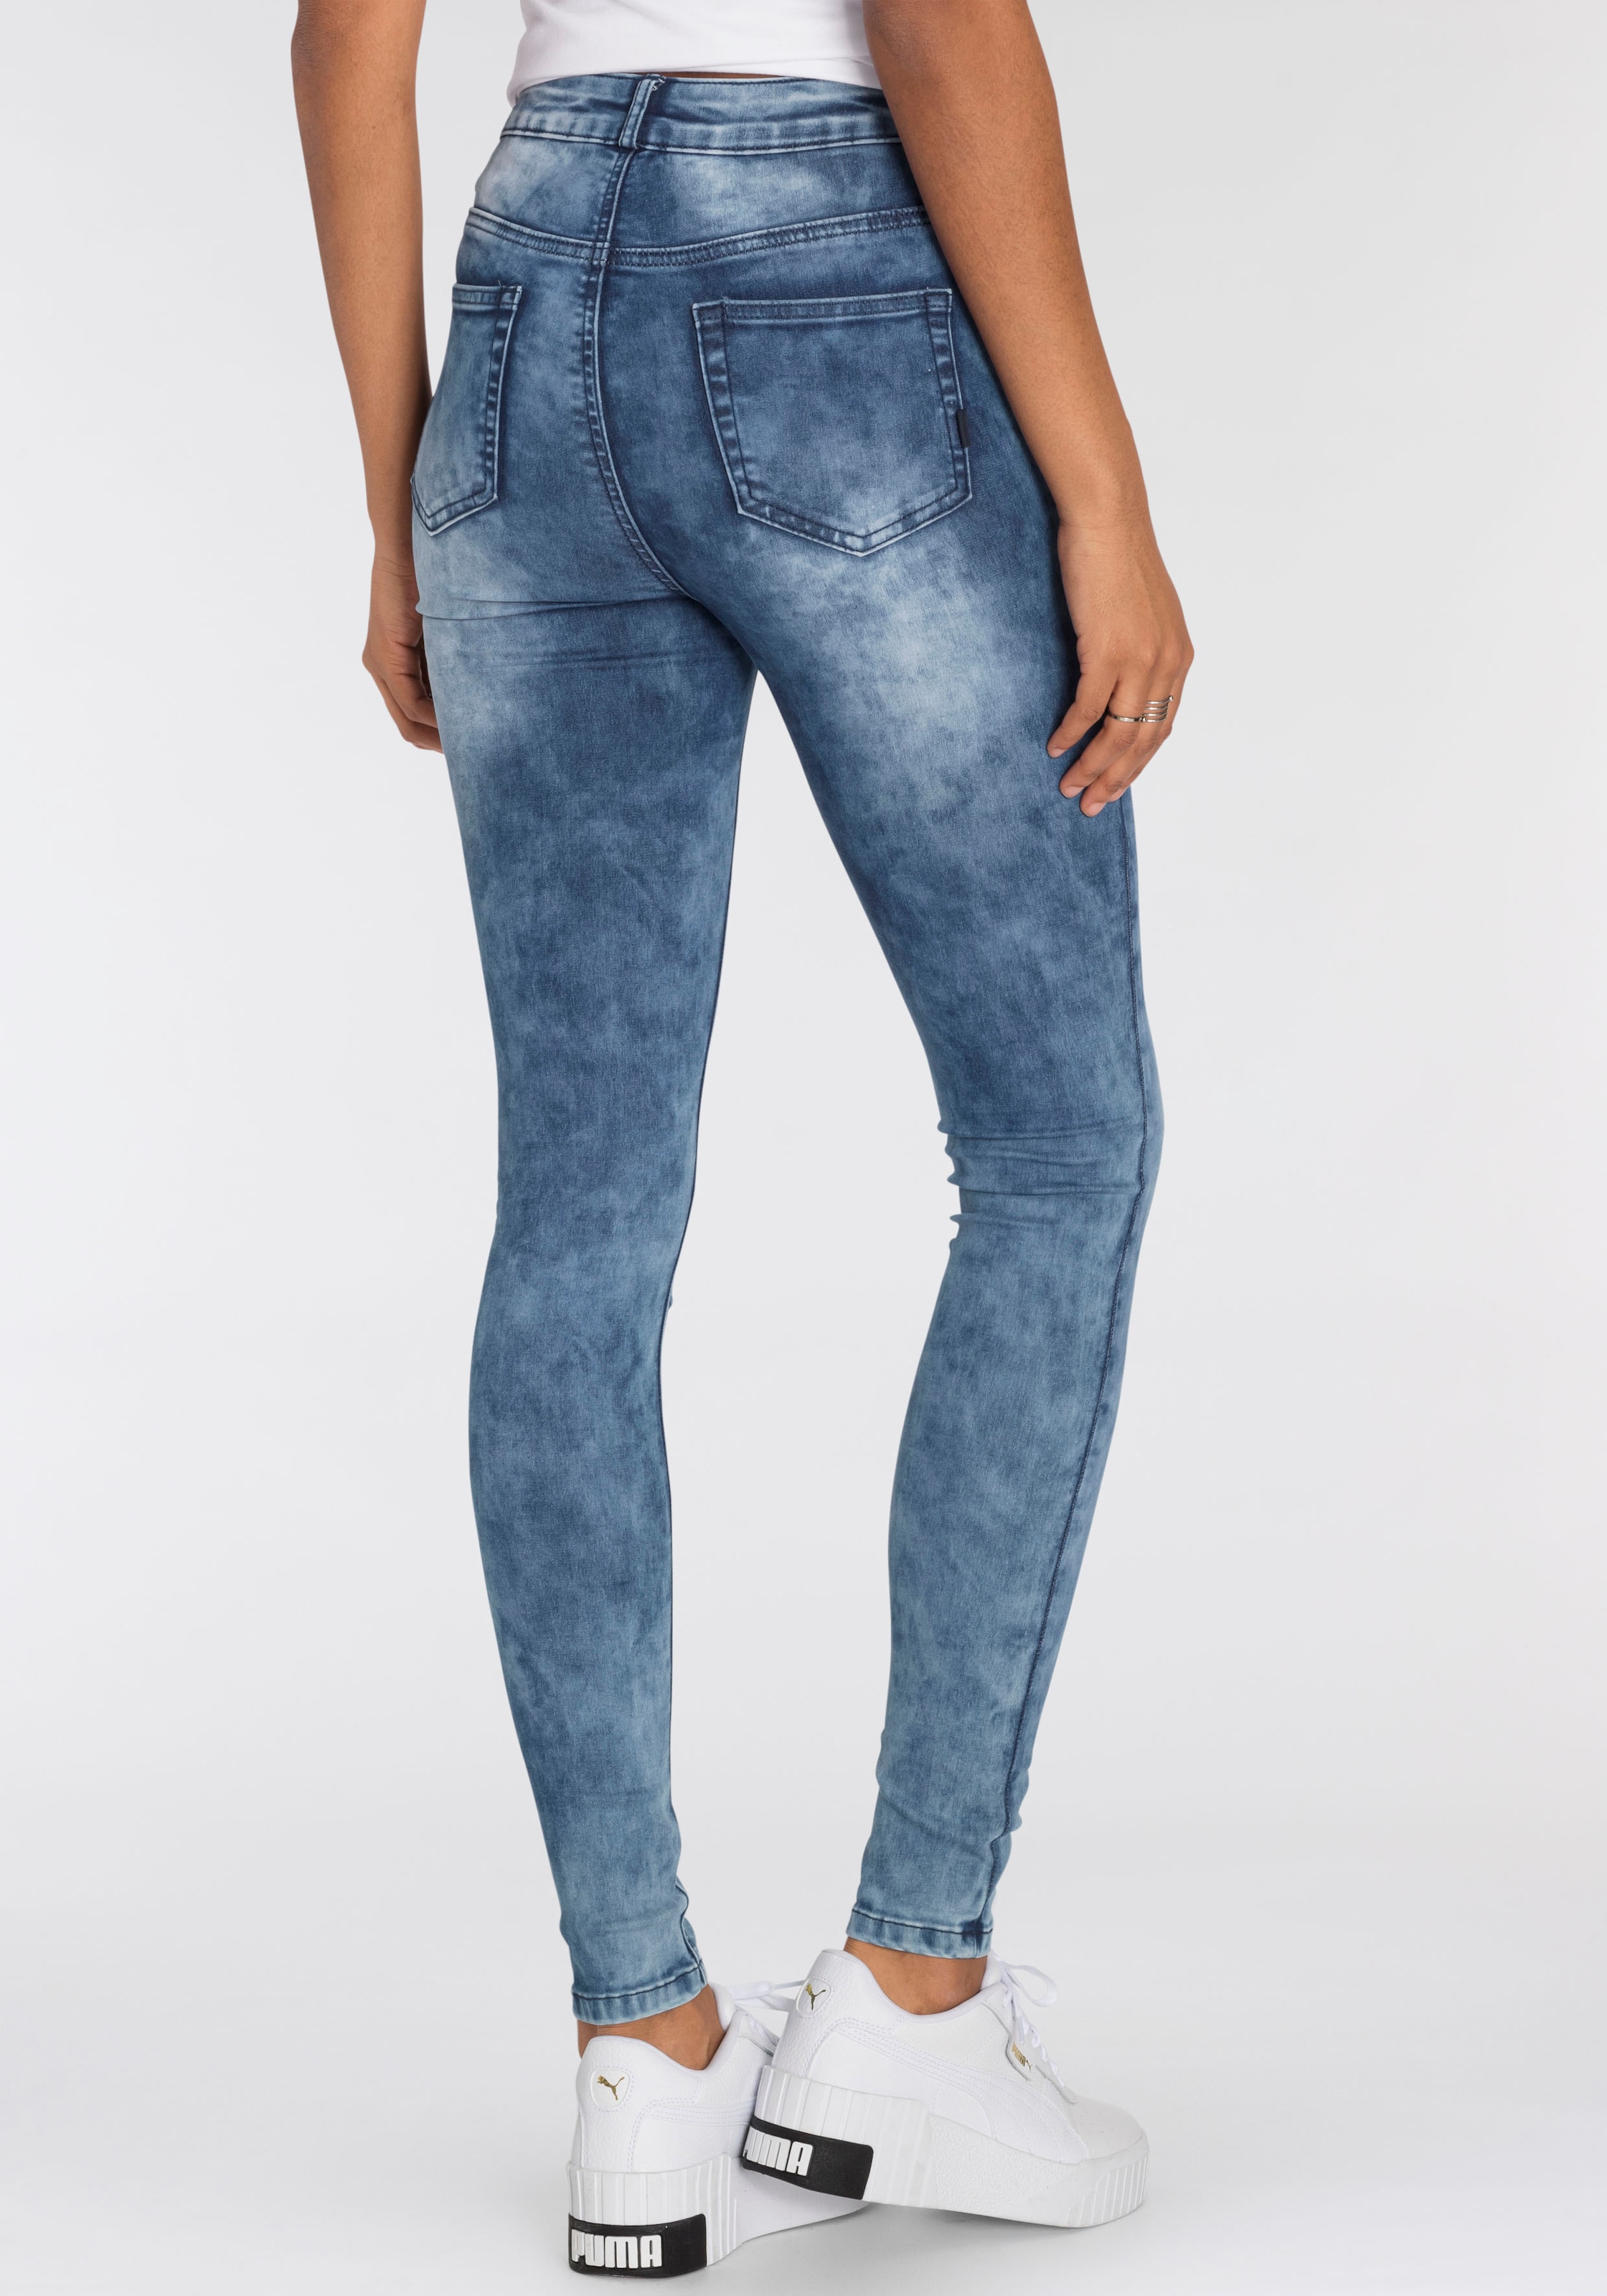 Arizona Stretch moon walking washed«, Skinny-fit-Jeans | shoppen I\'m Jeans Moonwashed »Ultra